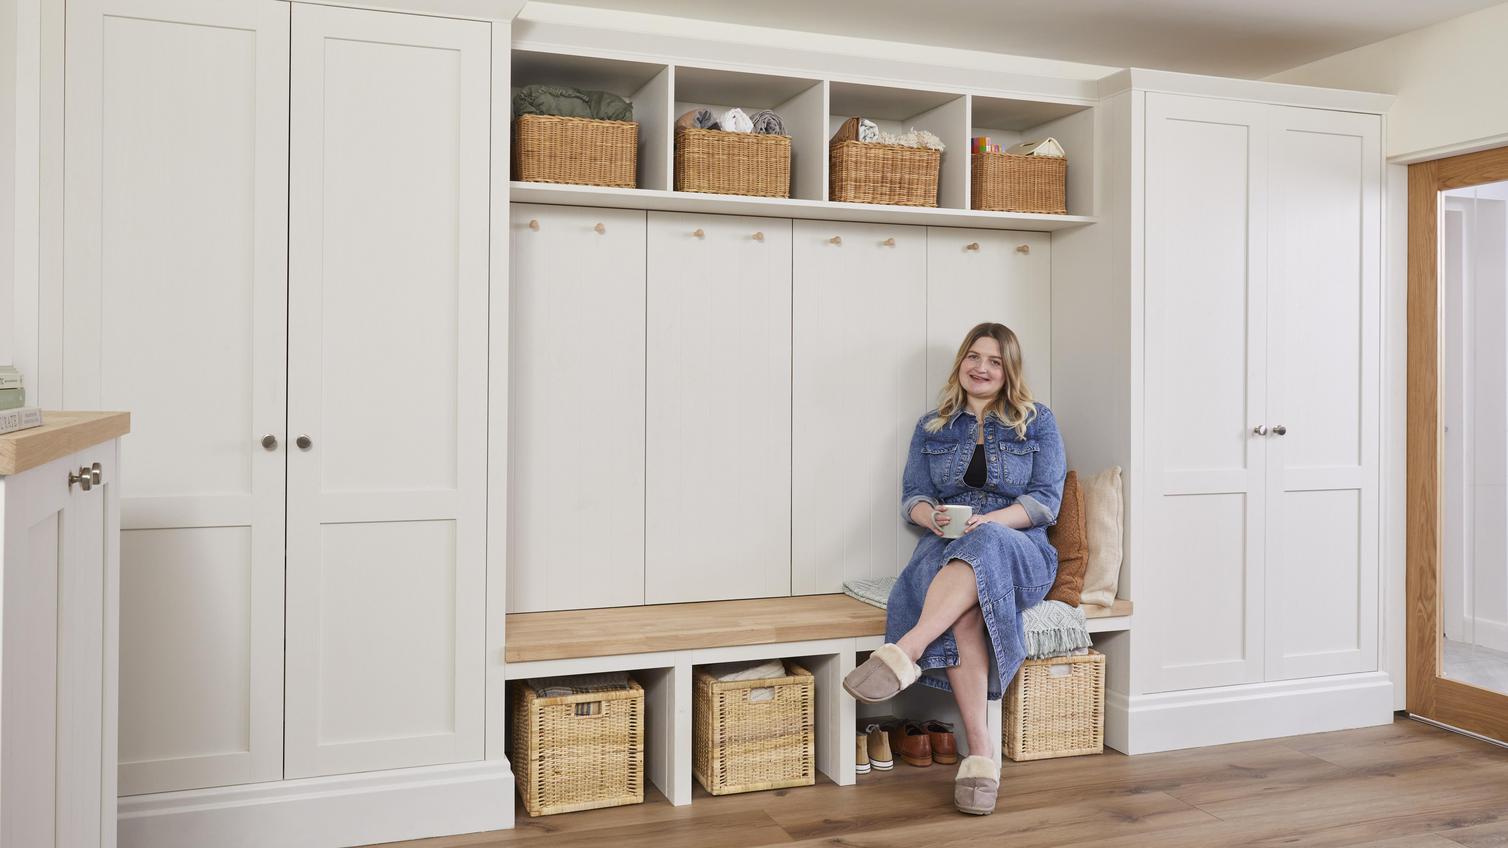 Courtney sat holding a mug, on the bench section of her white, built in storage from Howdens